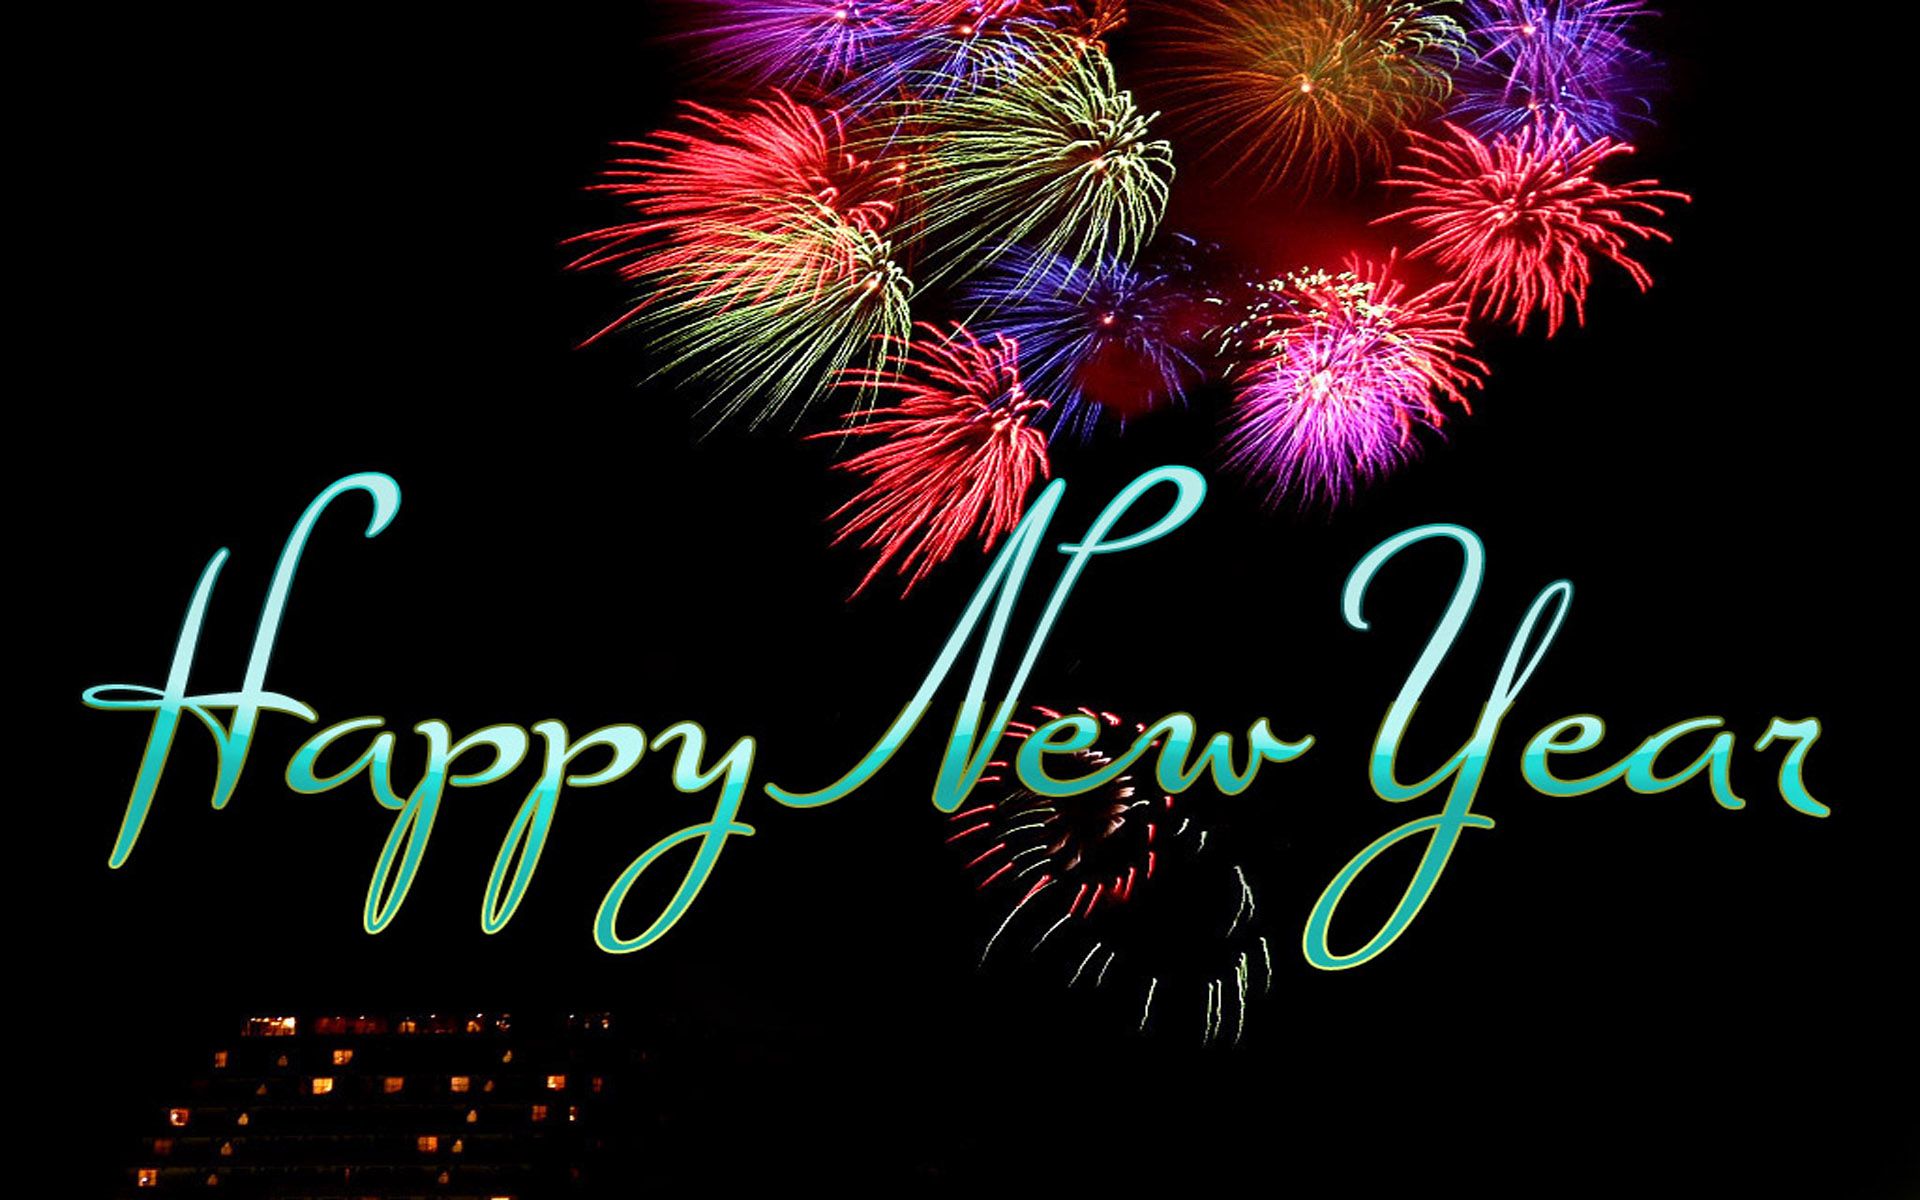 Happy New Year Image HD Wallpaper Pictures Photo Pics